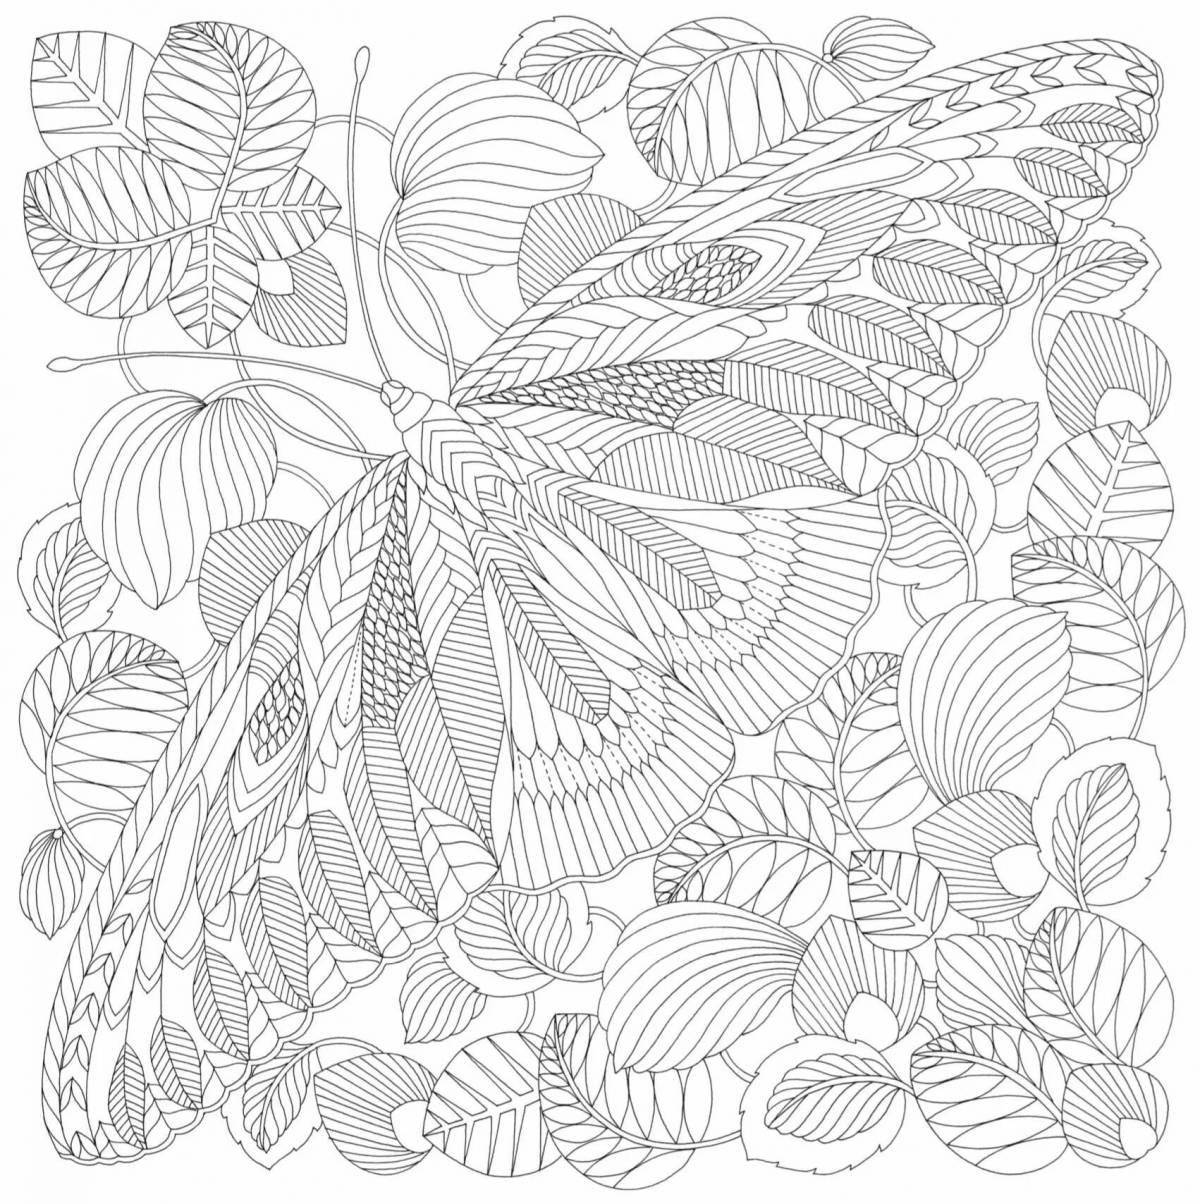 Tranquil wildberry antistress coloring book